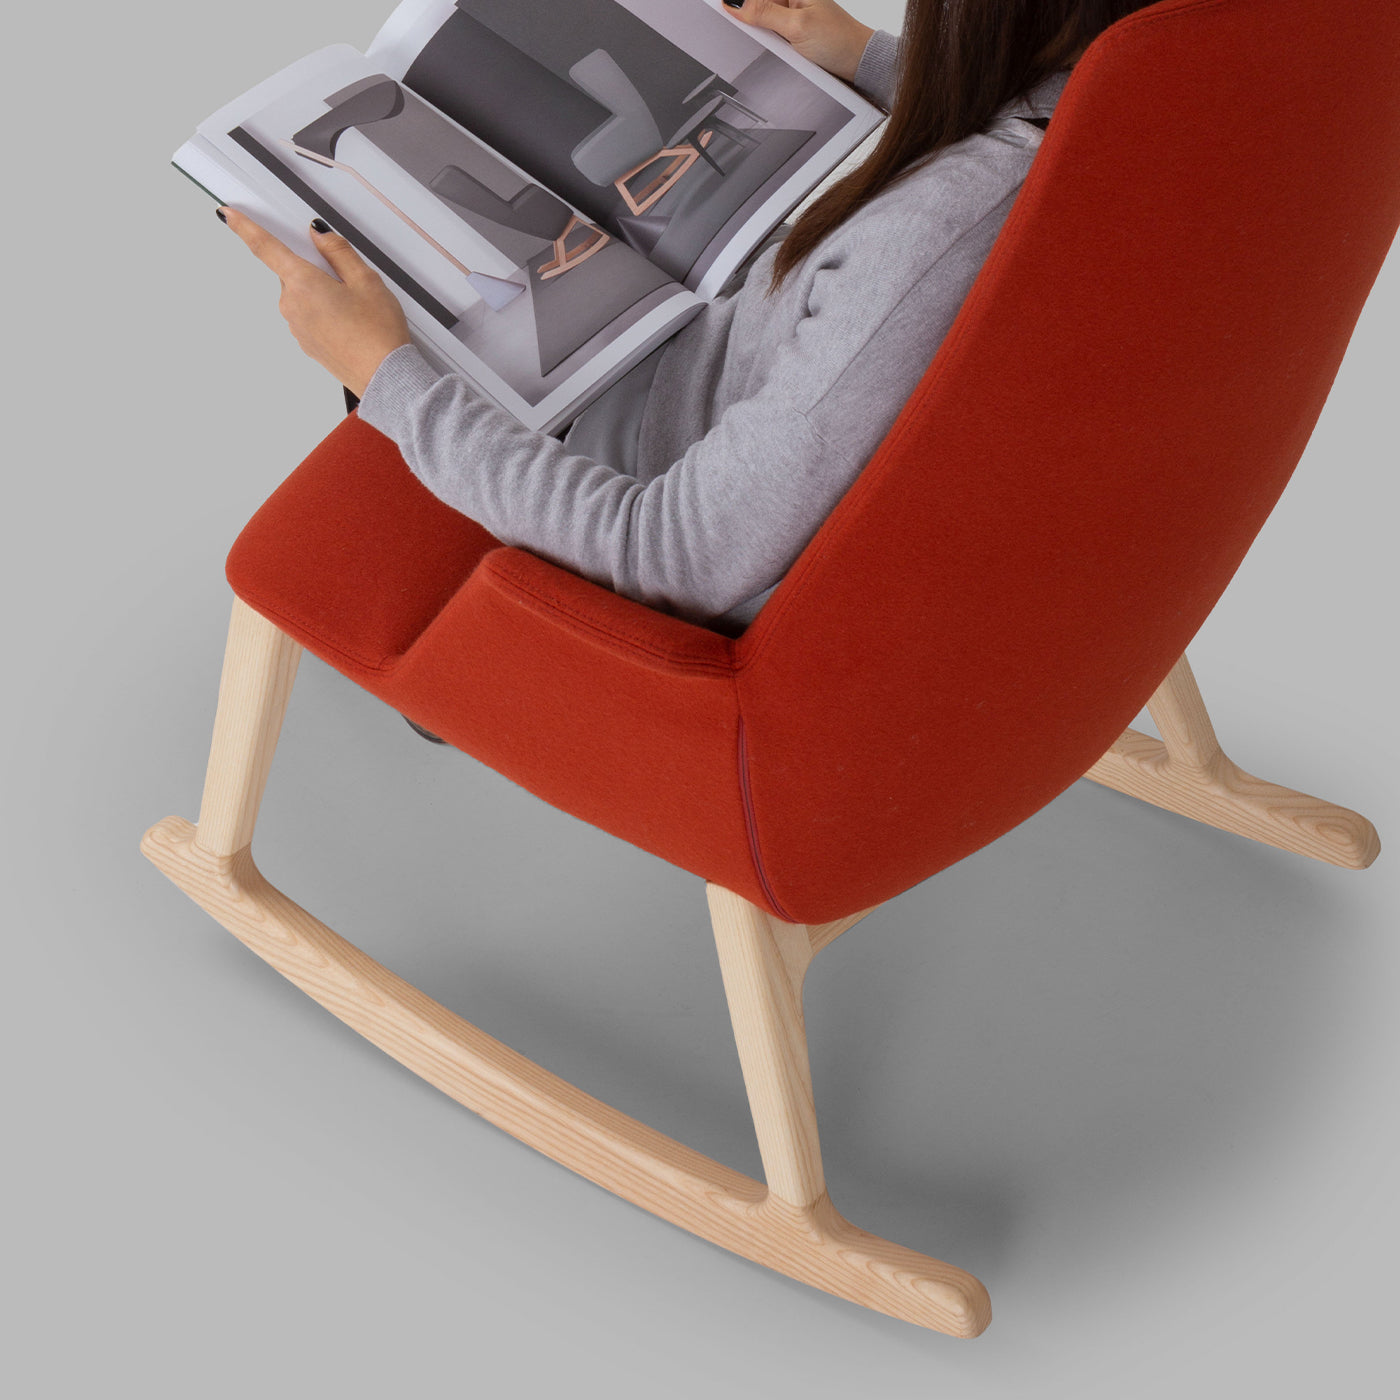 Hive Red Armchair by Camira - Alternative view 2